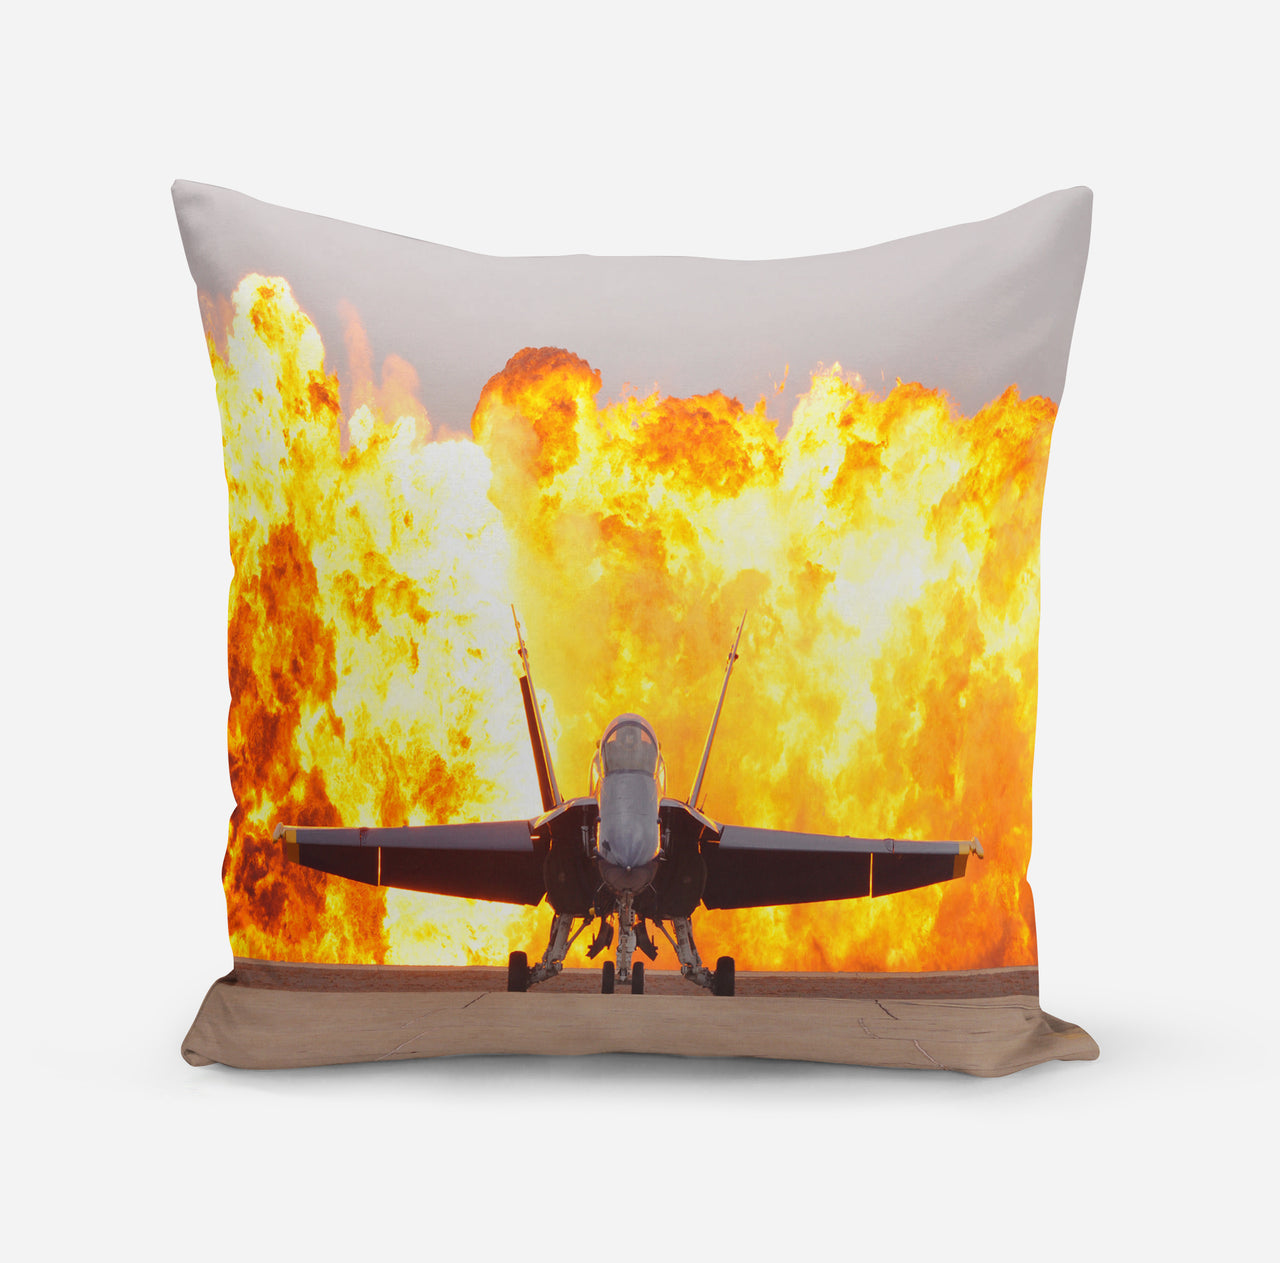 Face to Face with Air Force Jet & Flames Designed Pillows